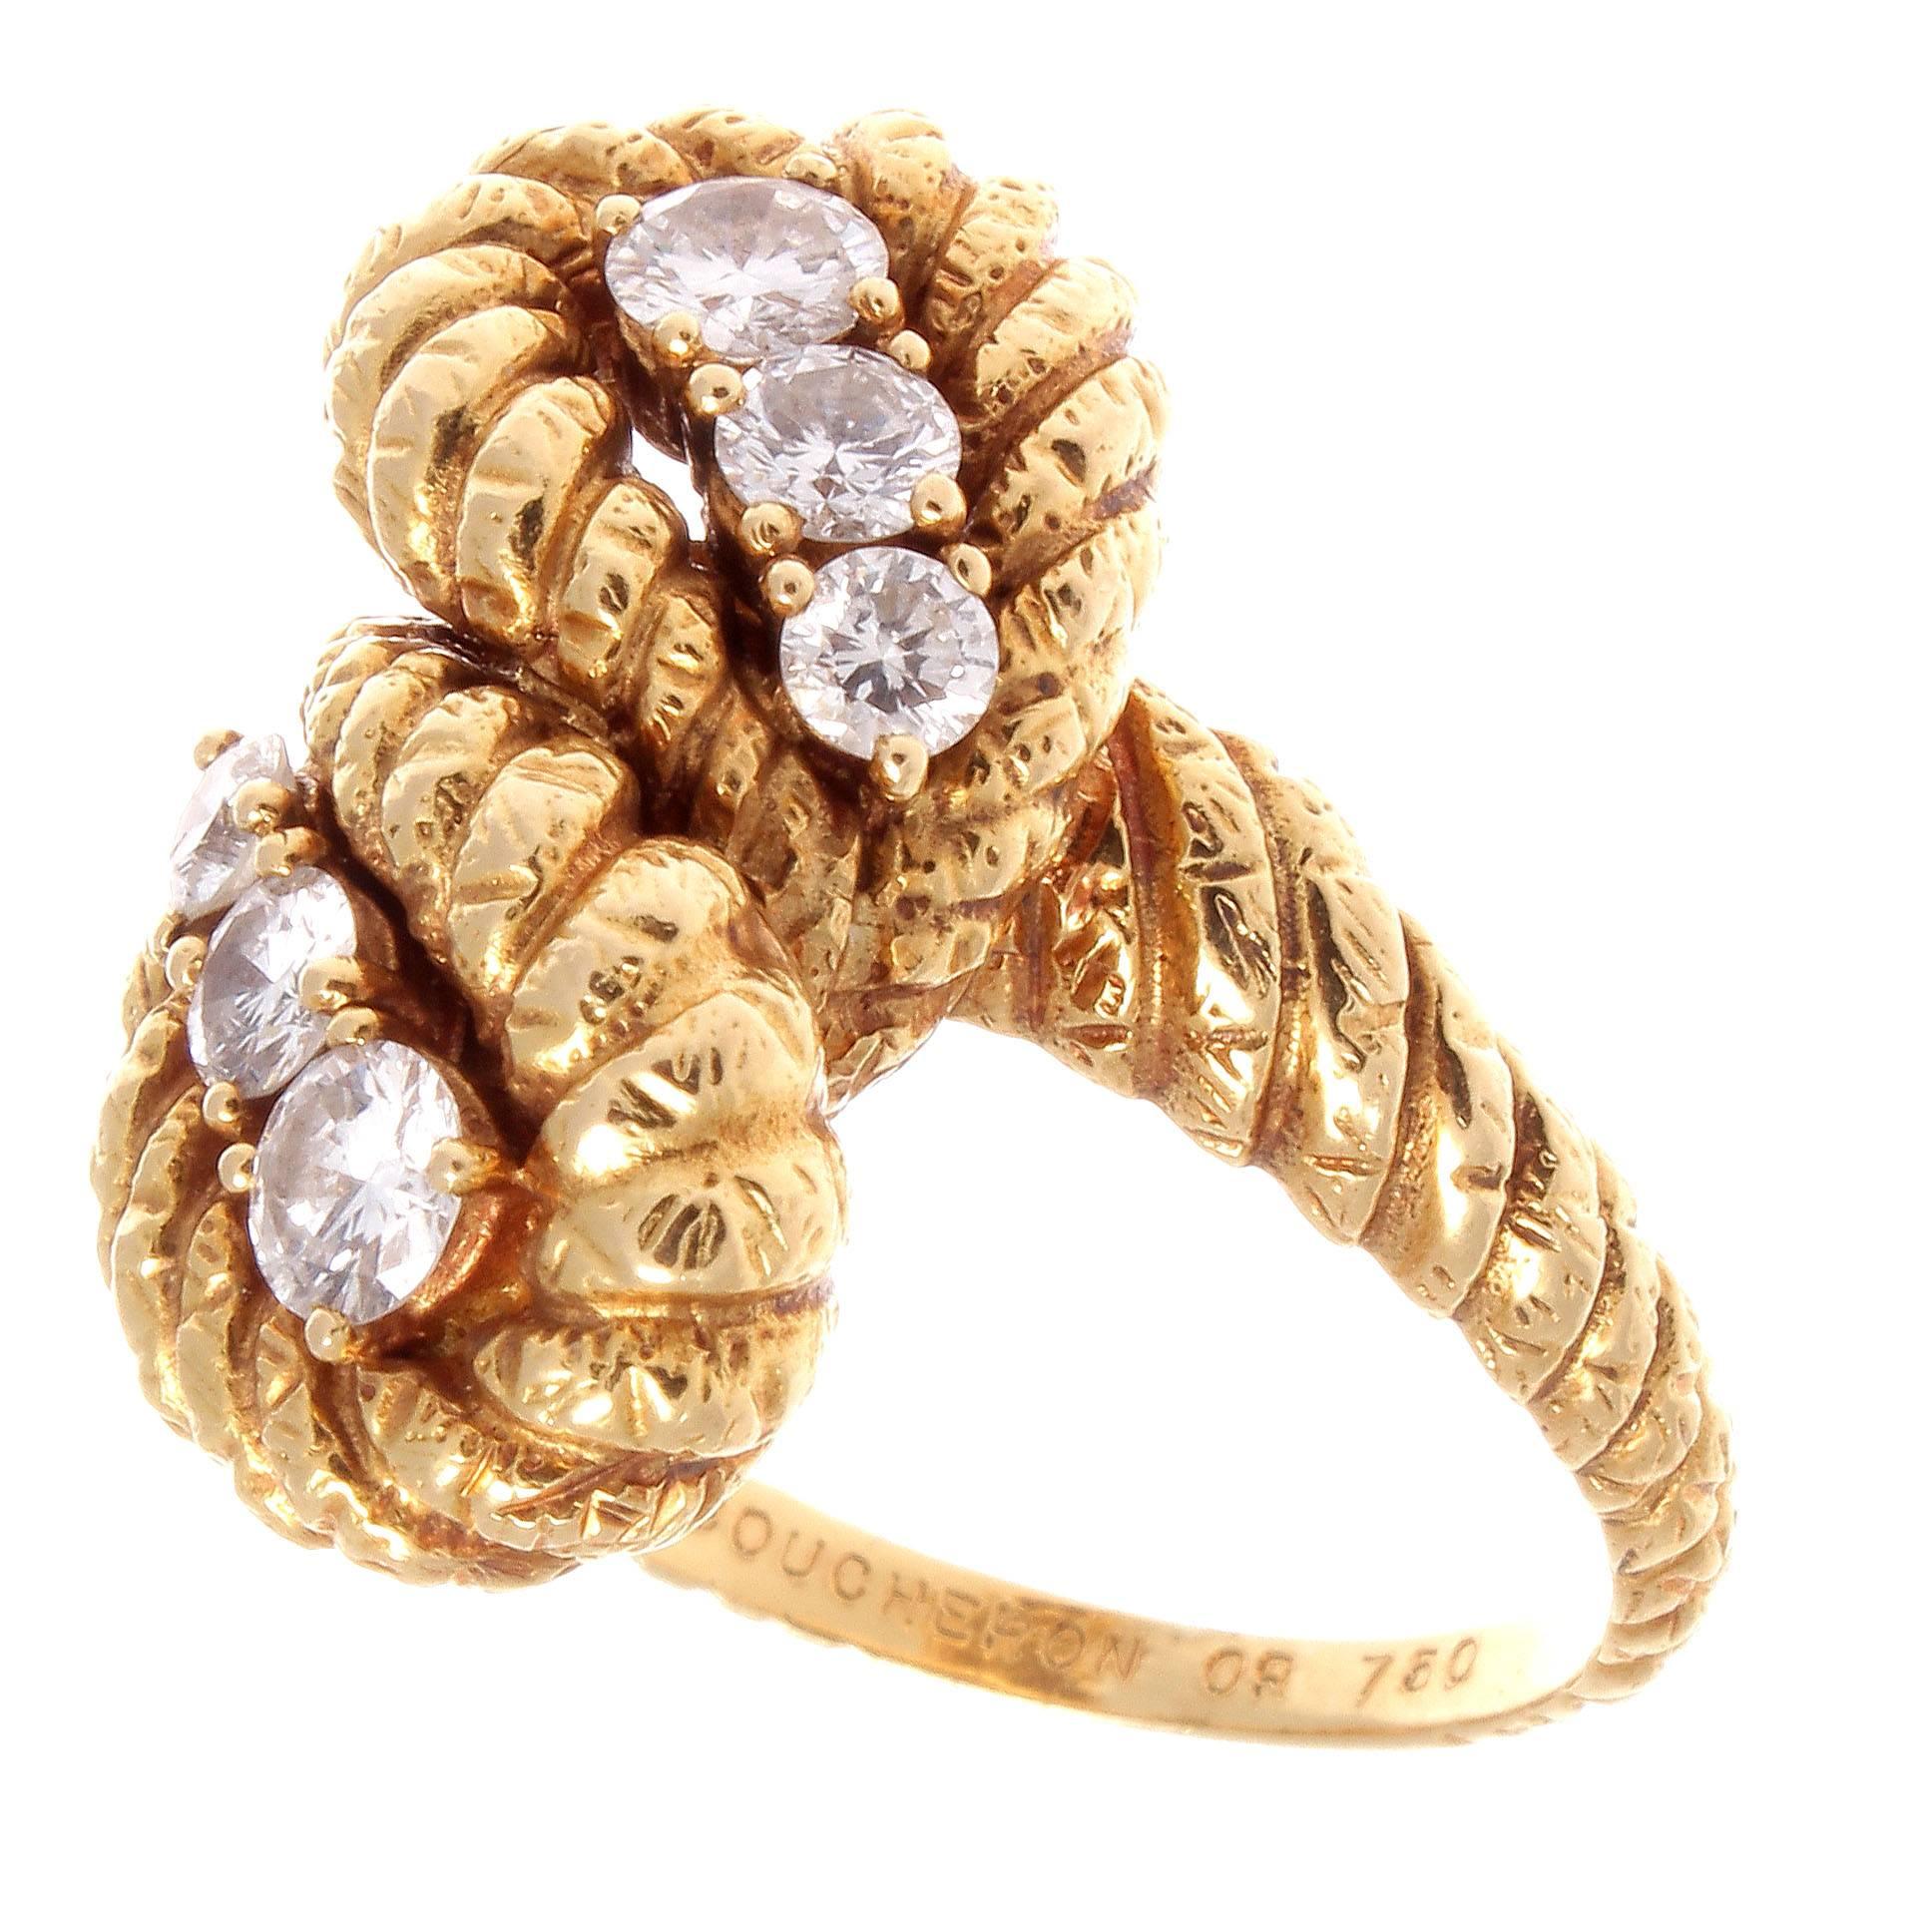 Boucheron is among the top tier jewelers from Paris and is famous for their superior craftsmanship and elegant designs. This easy to own Boucheron is a well designed and executed rope motif diamond ring featuring 6 matching diamonds. Boucheron wears